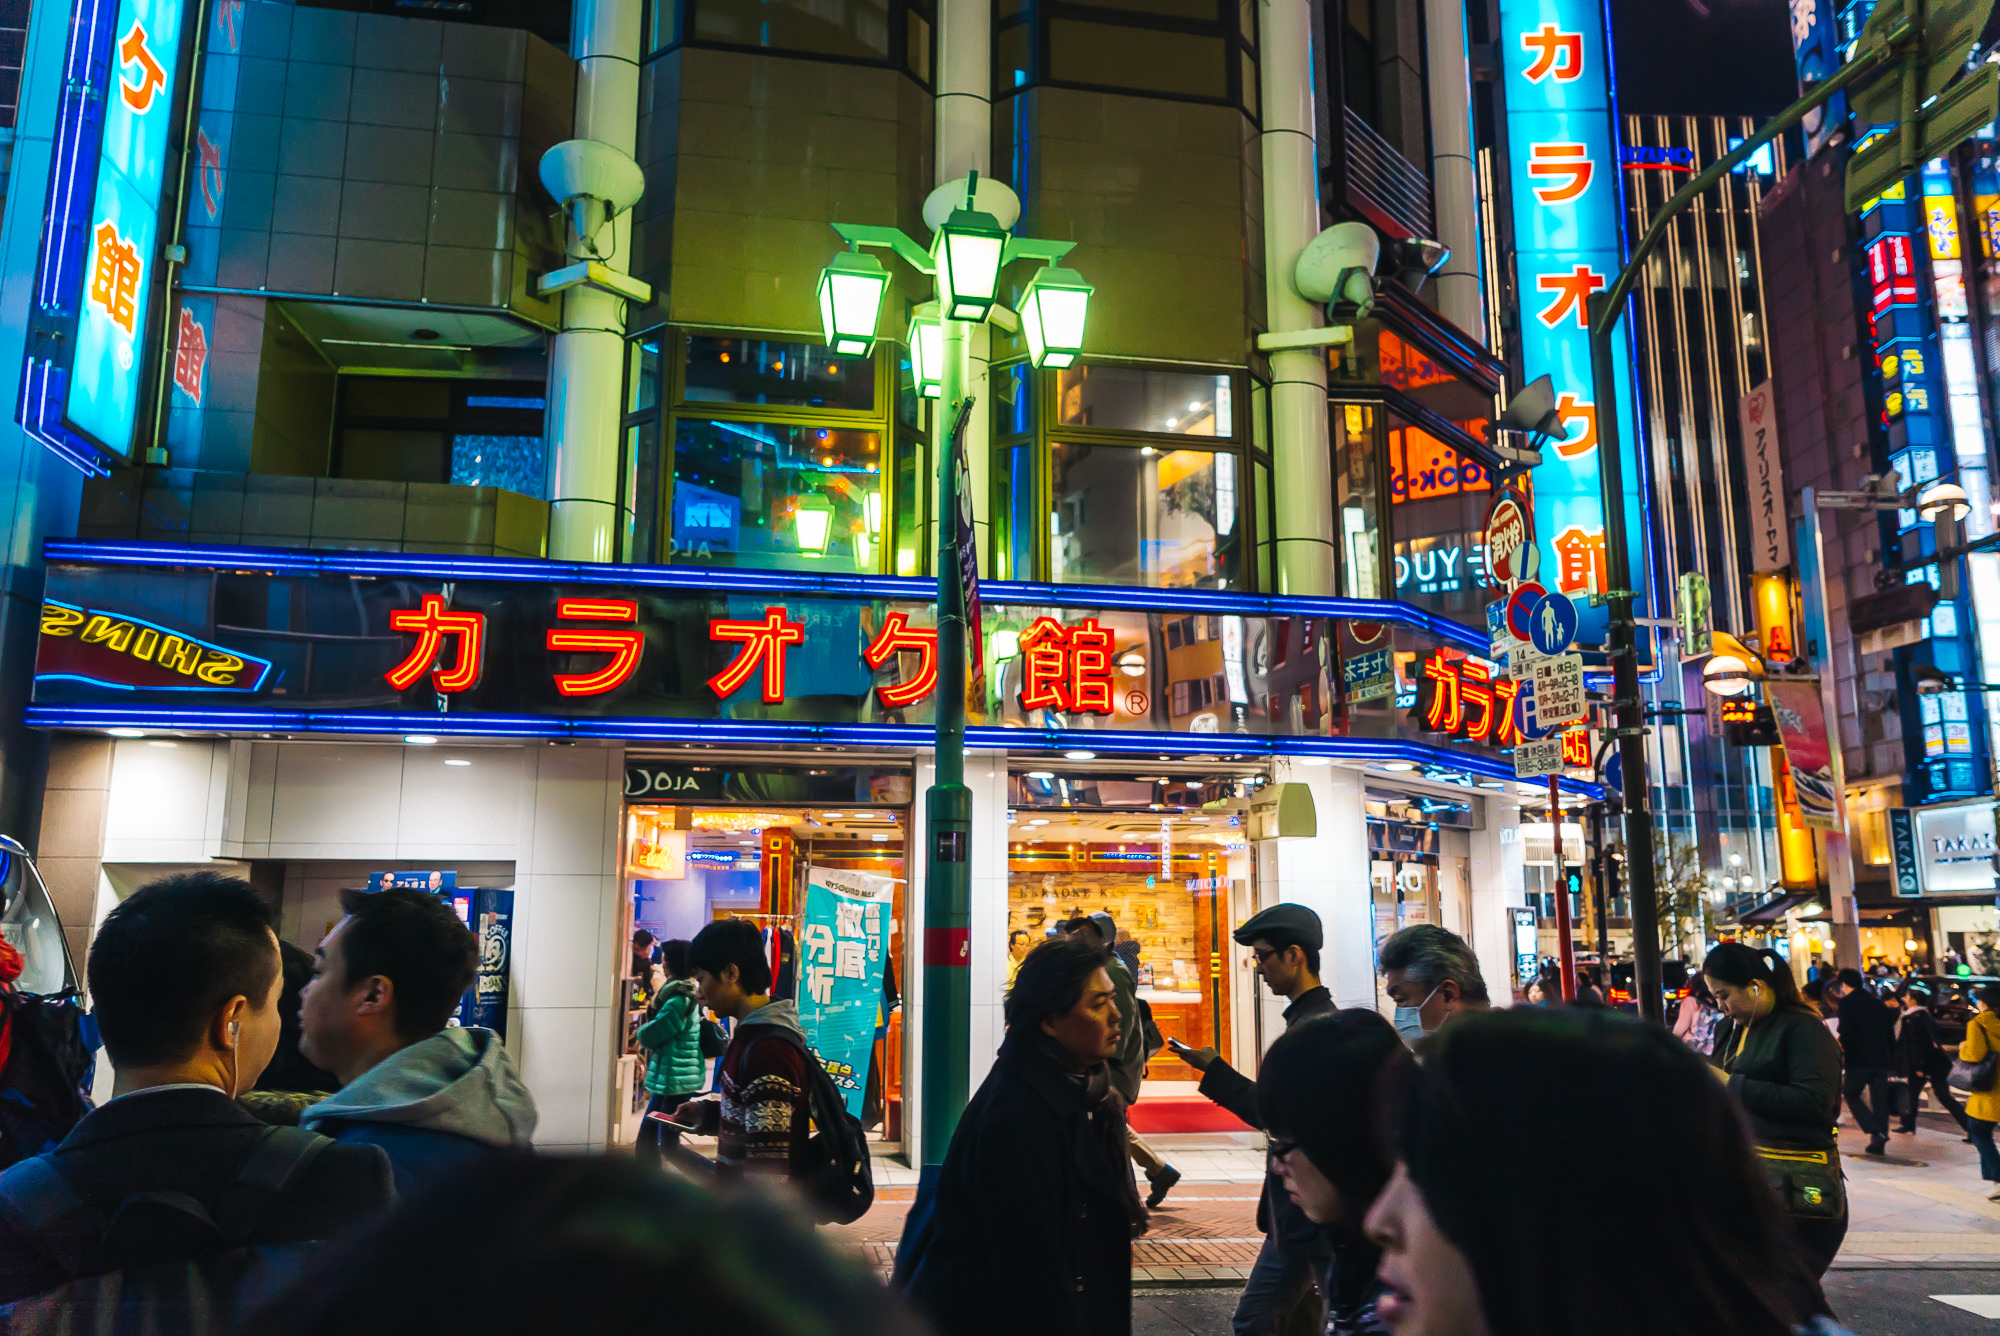 How To Have a Fun Night of Karaoke in Japan - Travel Pockets